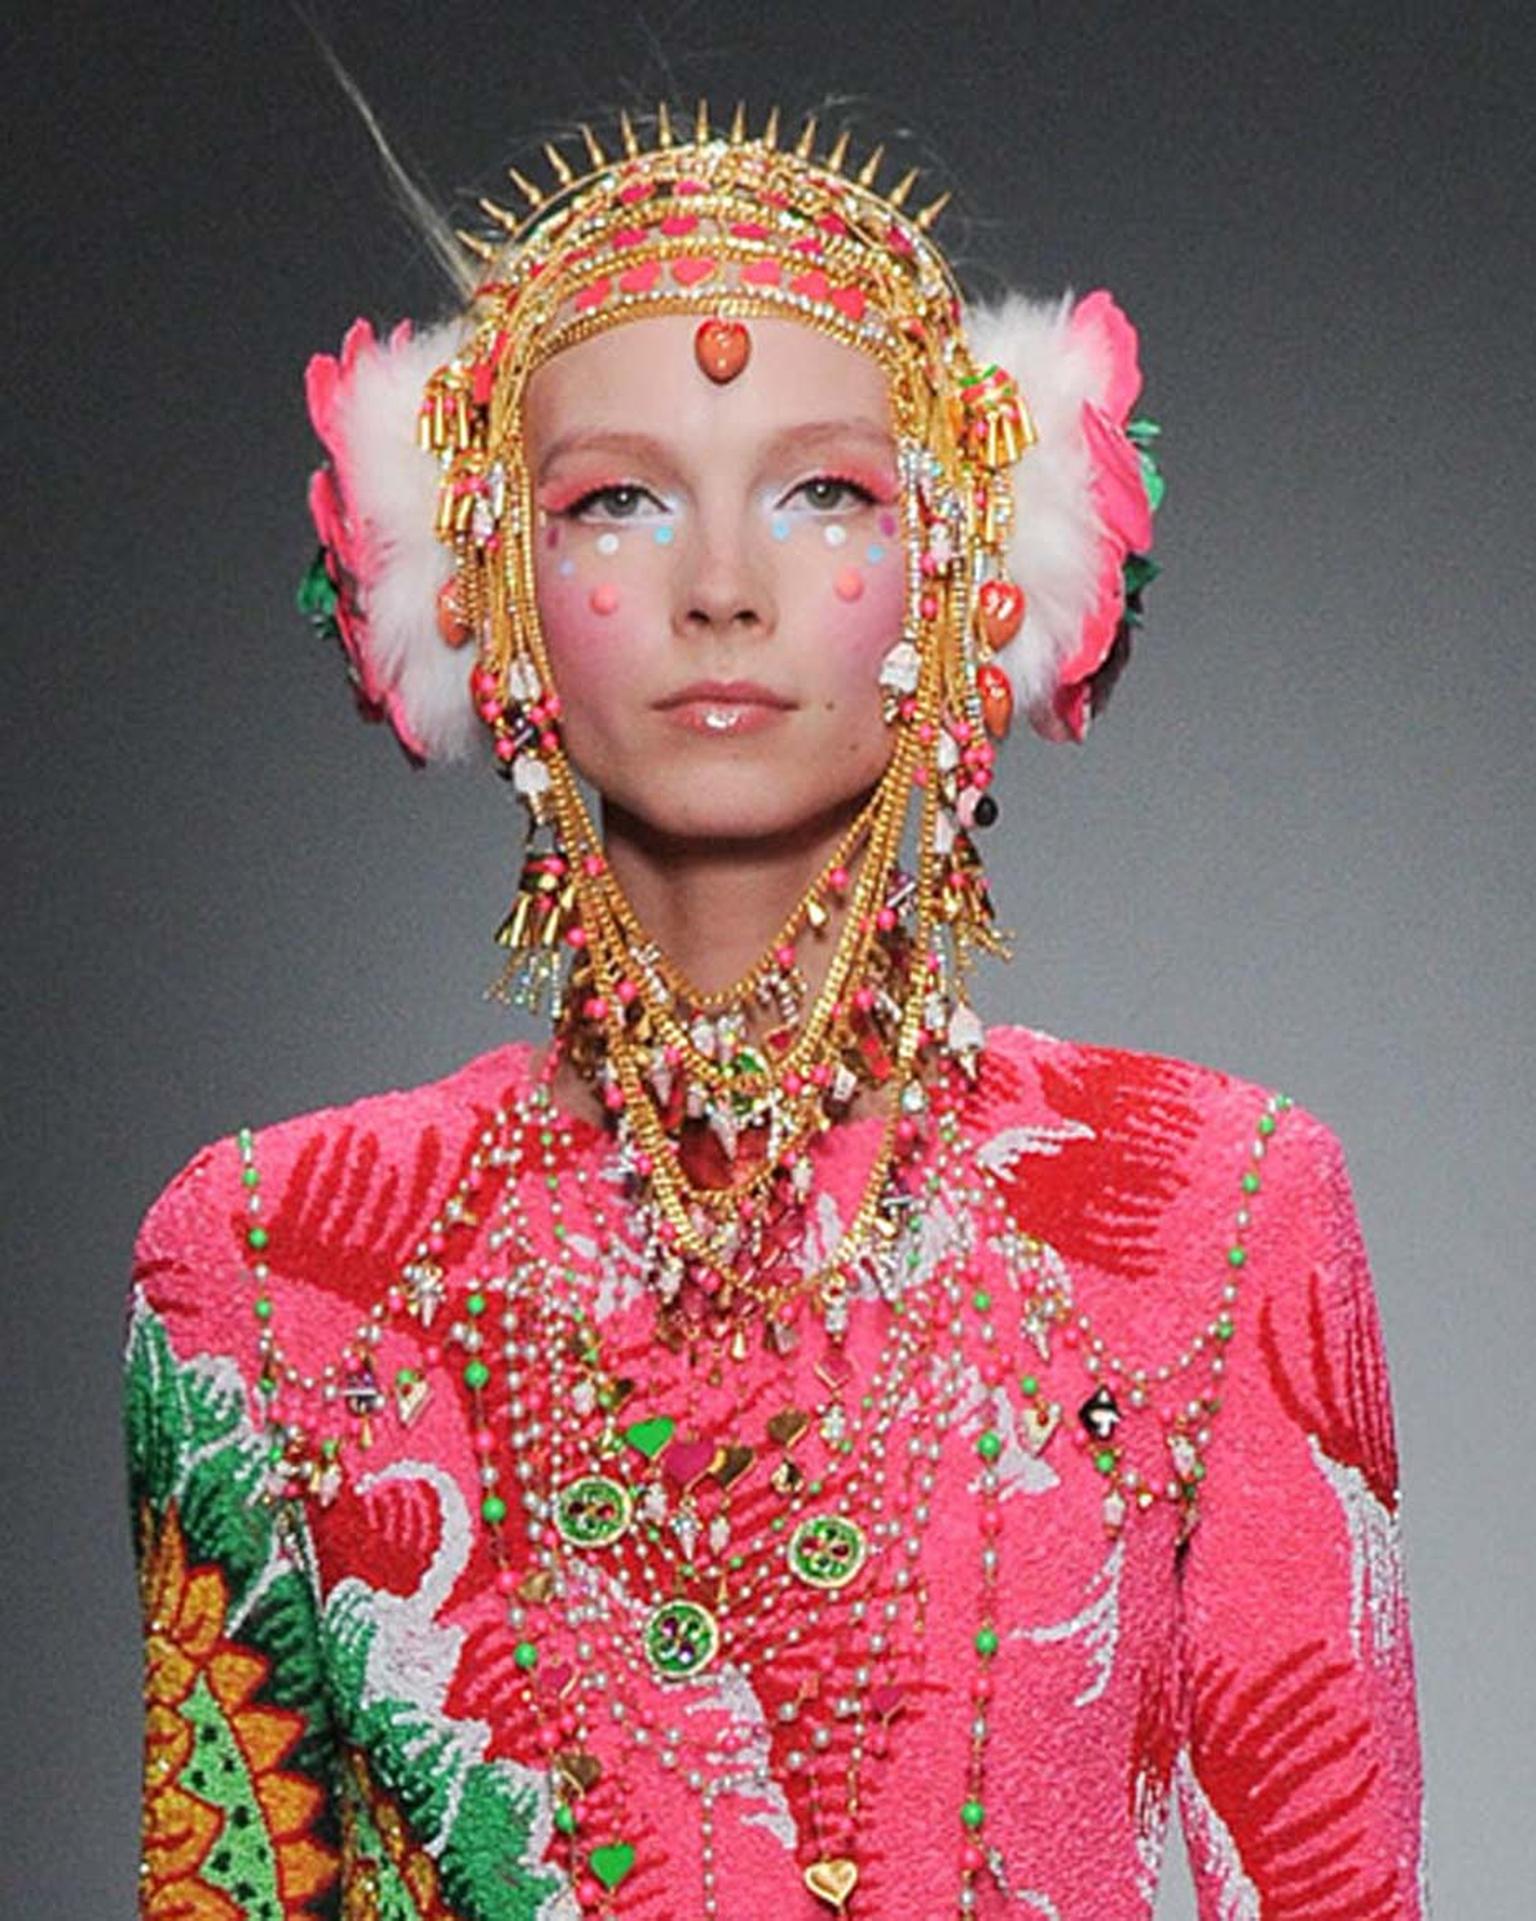 A model wearing jewels from Amrapali and Manish Arora's fourth collaborative collection during Paris Fashion Week.